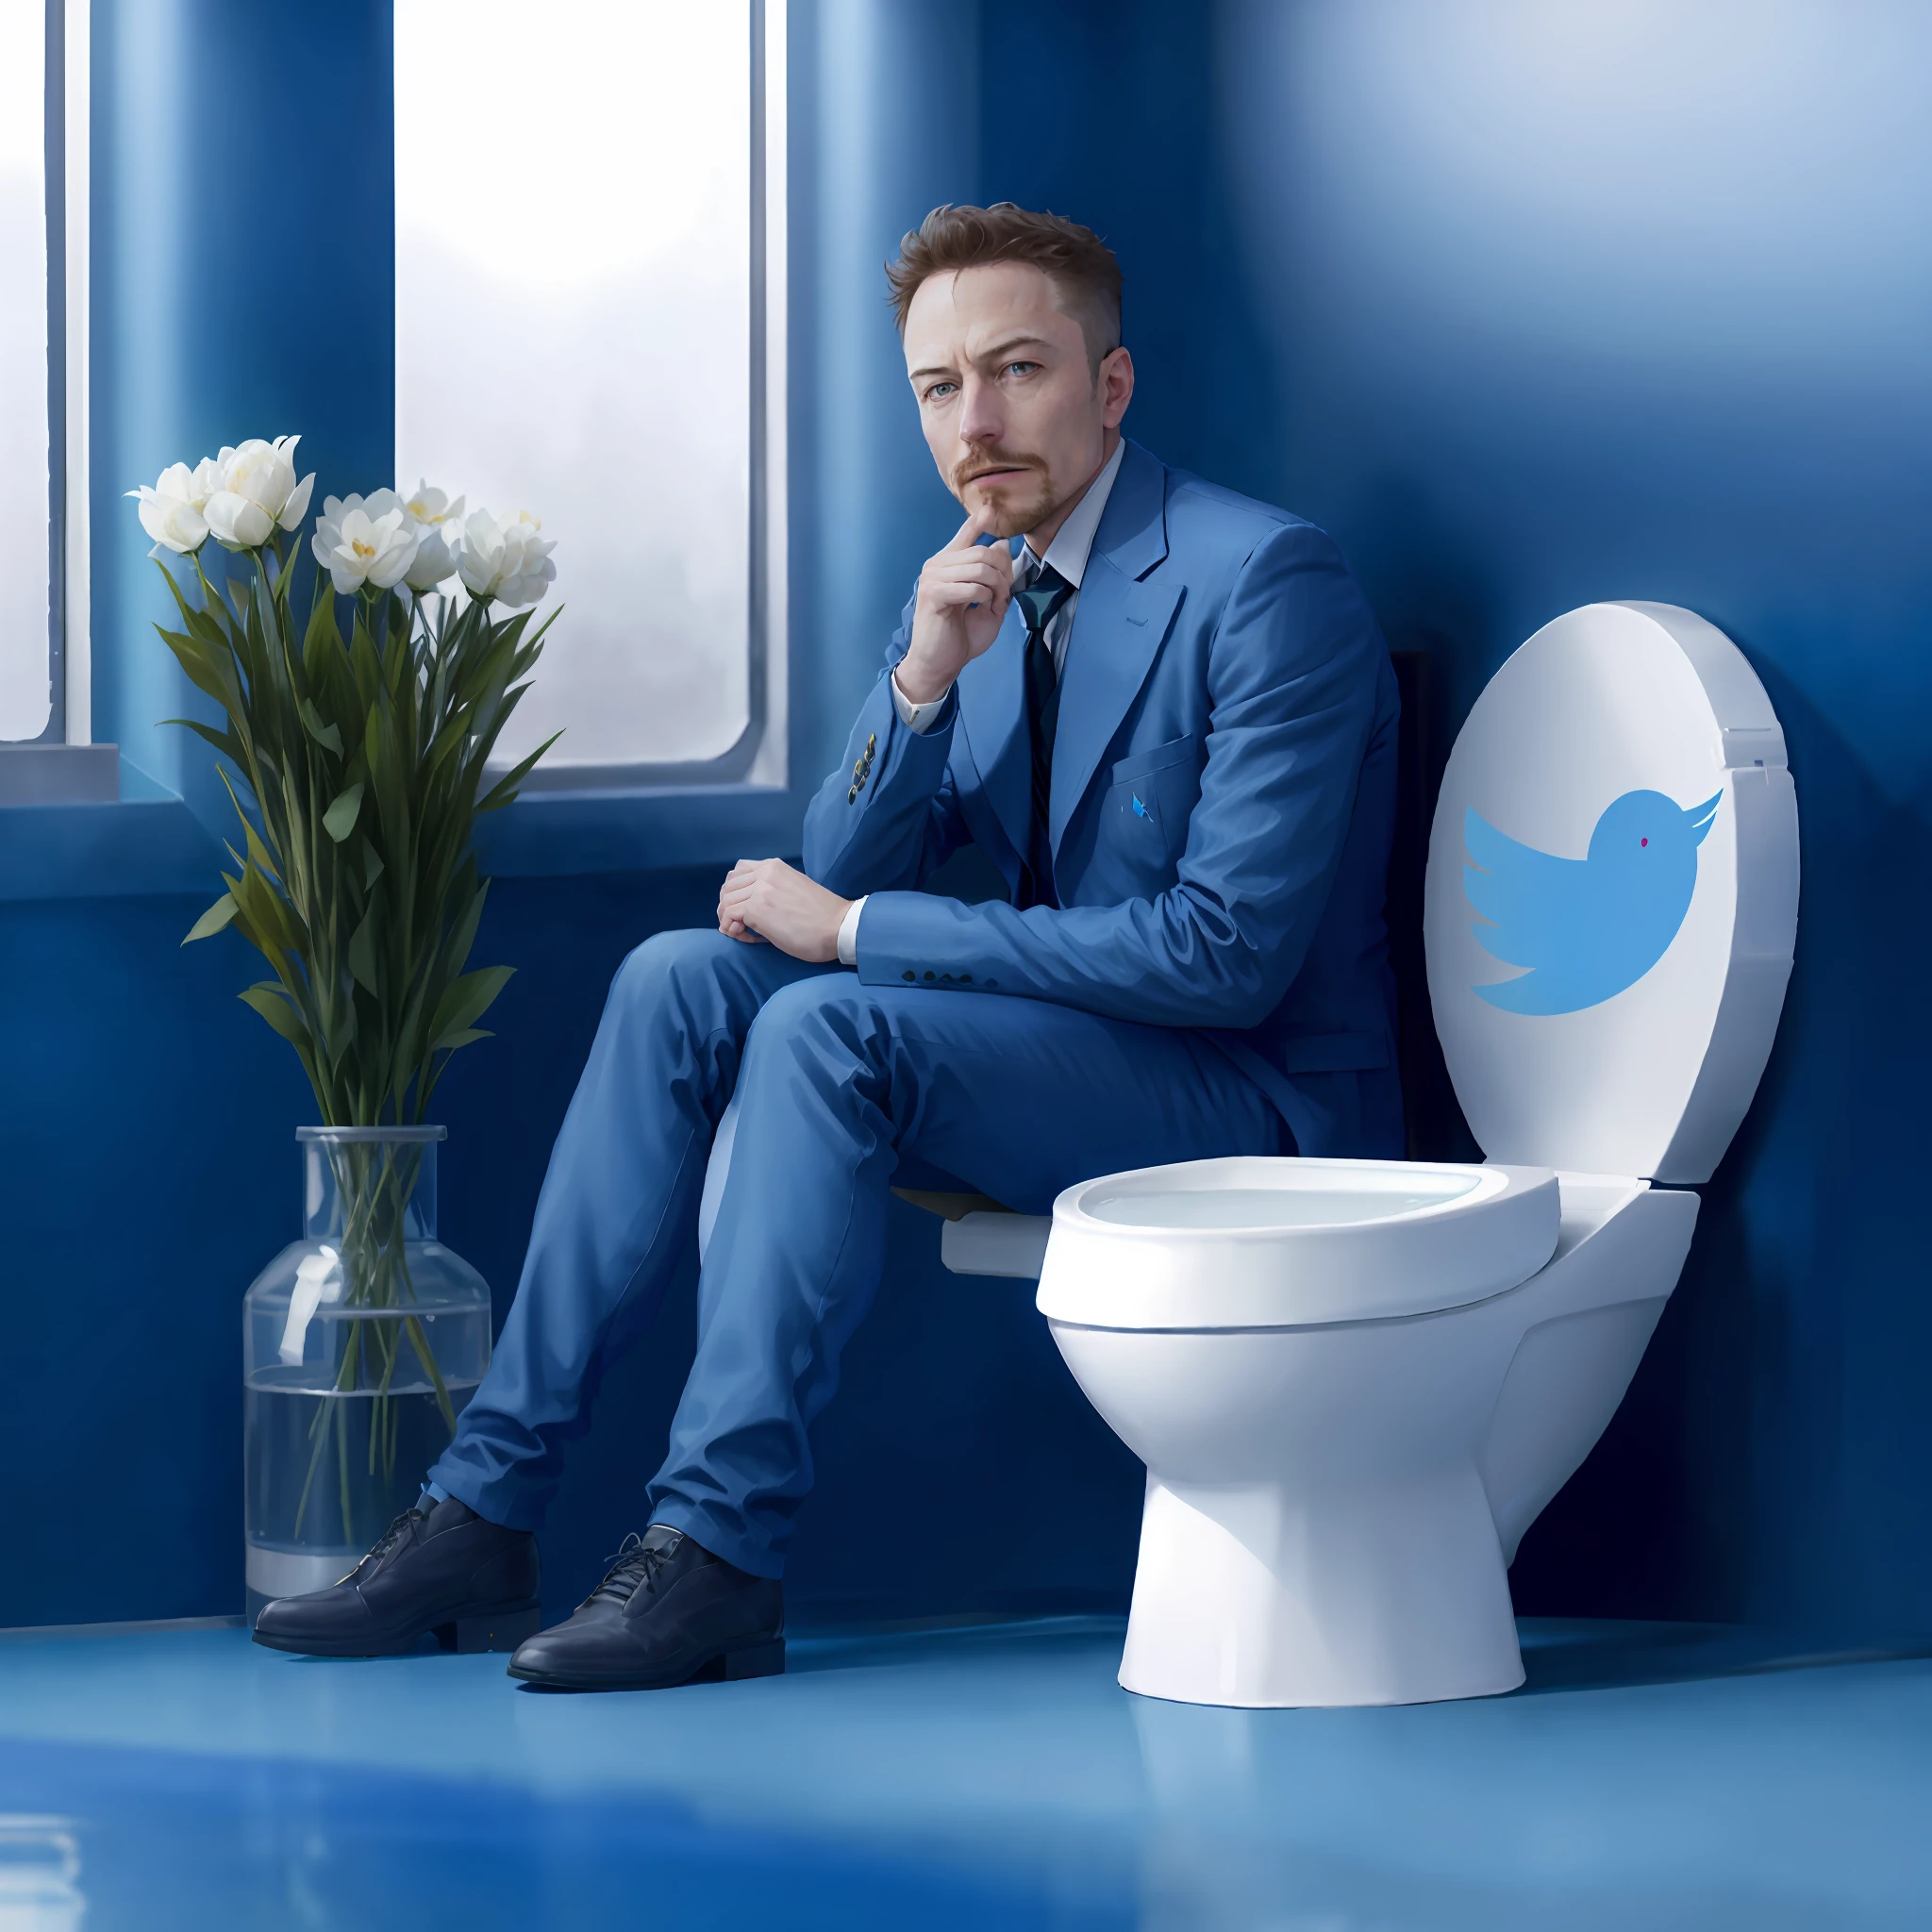 arafed Ellon Musk in a blue suit sitting on a toilet with a twitter logo on the tank, elon musk as joker, elon musk as a greek god, elon musk as a musketeer, elon musk in fortnite, trending on twitter, elon musk, viral on twitter, elon musk as thor, , black elon musk, gaming chair as a toilet, gaming toilet